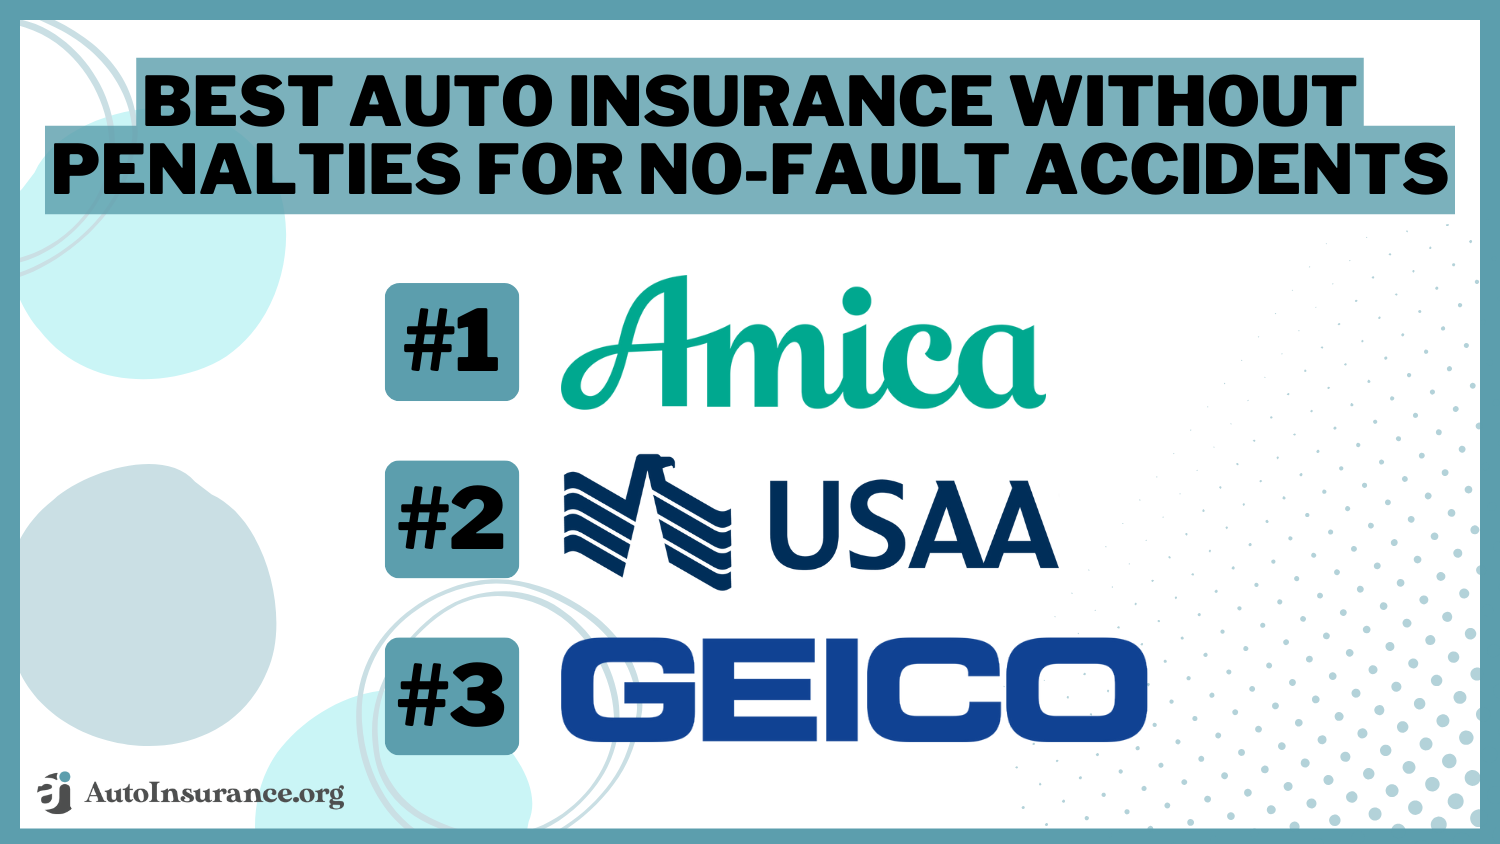 Best Auto Insurance Without Penalties For No-Fault Accidents